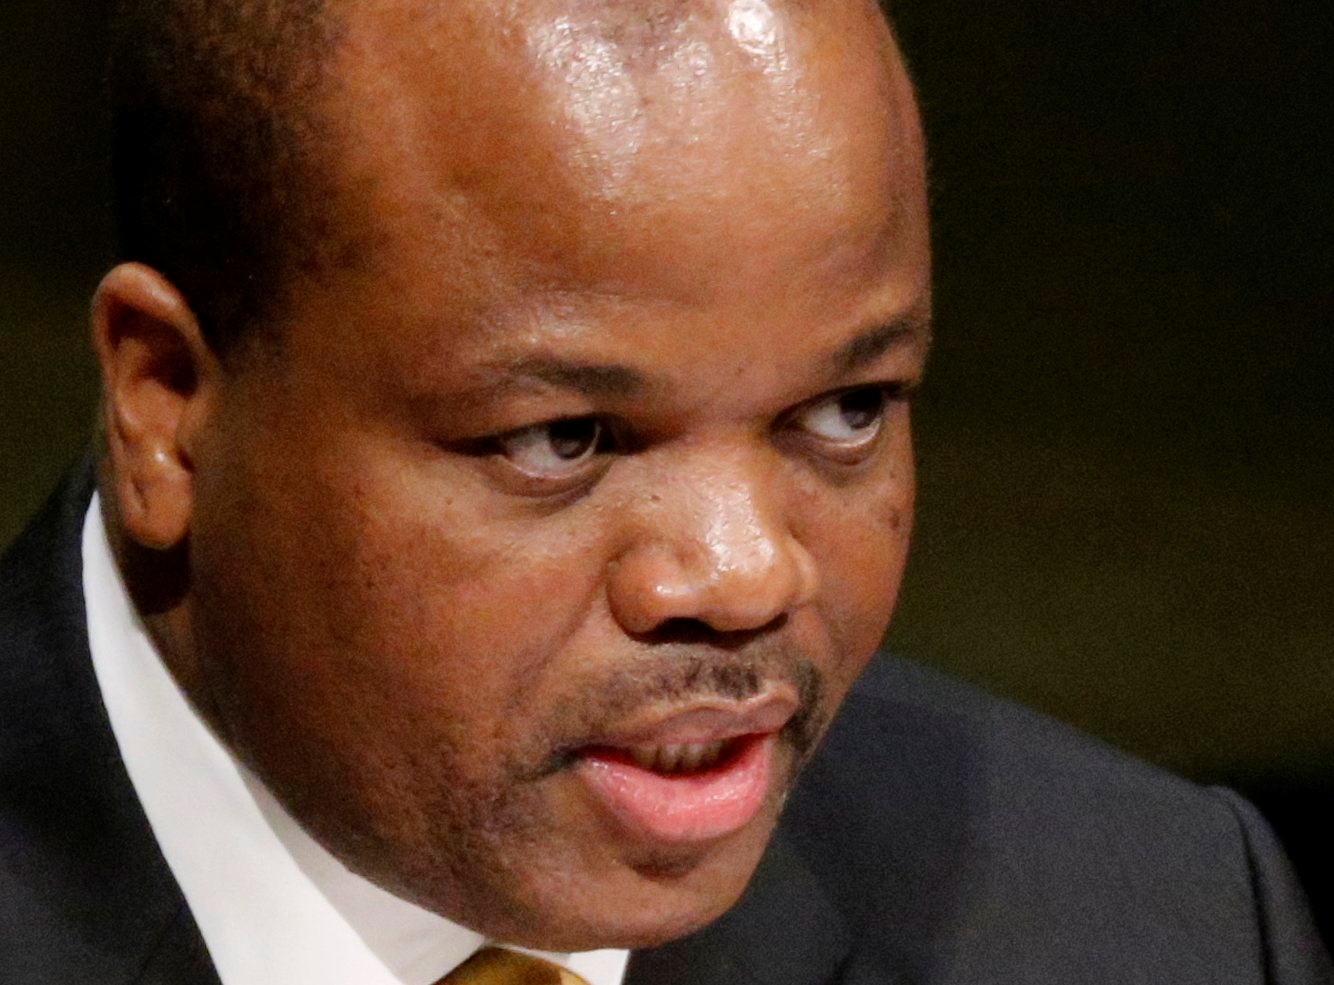 King Mswati III of Swaziland addresses attendees during the 70th session of the United Nations General Assembly at the U.N. headquarters in New York, September 29, 2015.   REUTERS/Carlo Allegri/File Photo